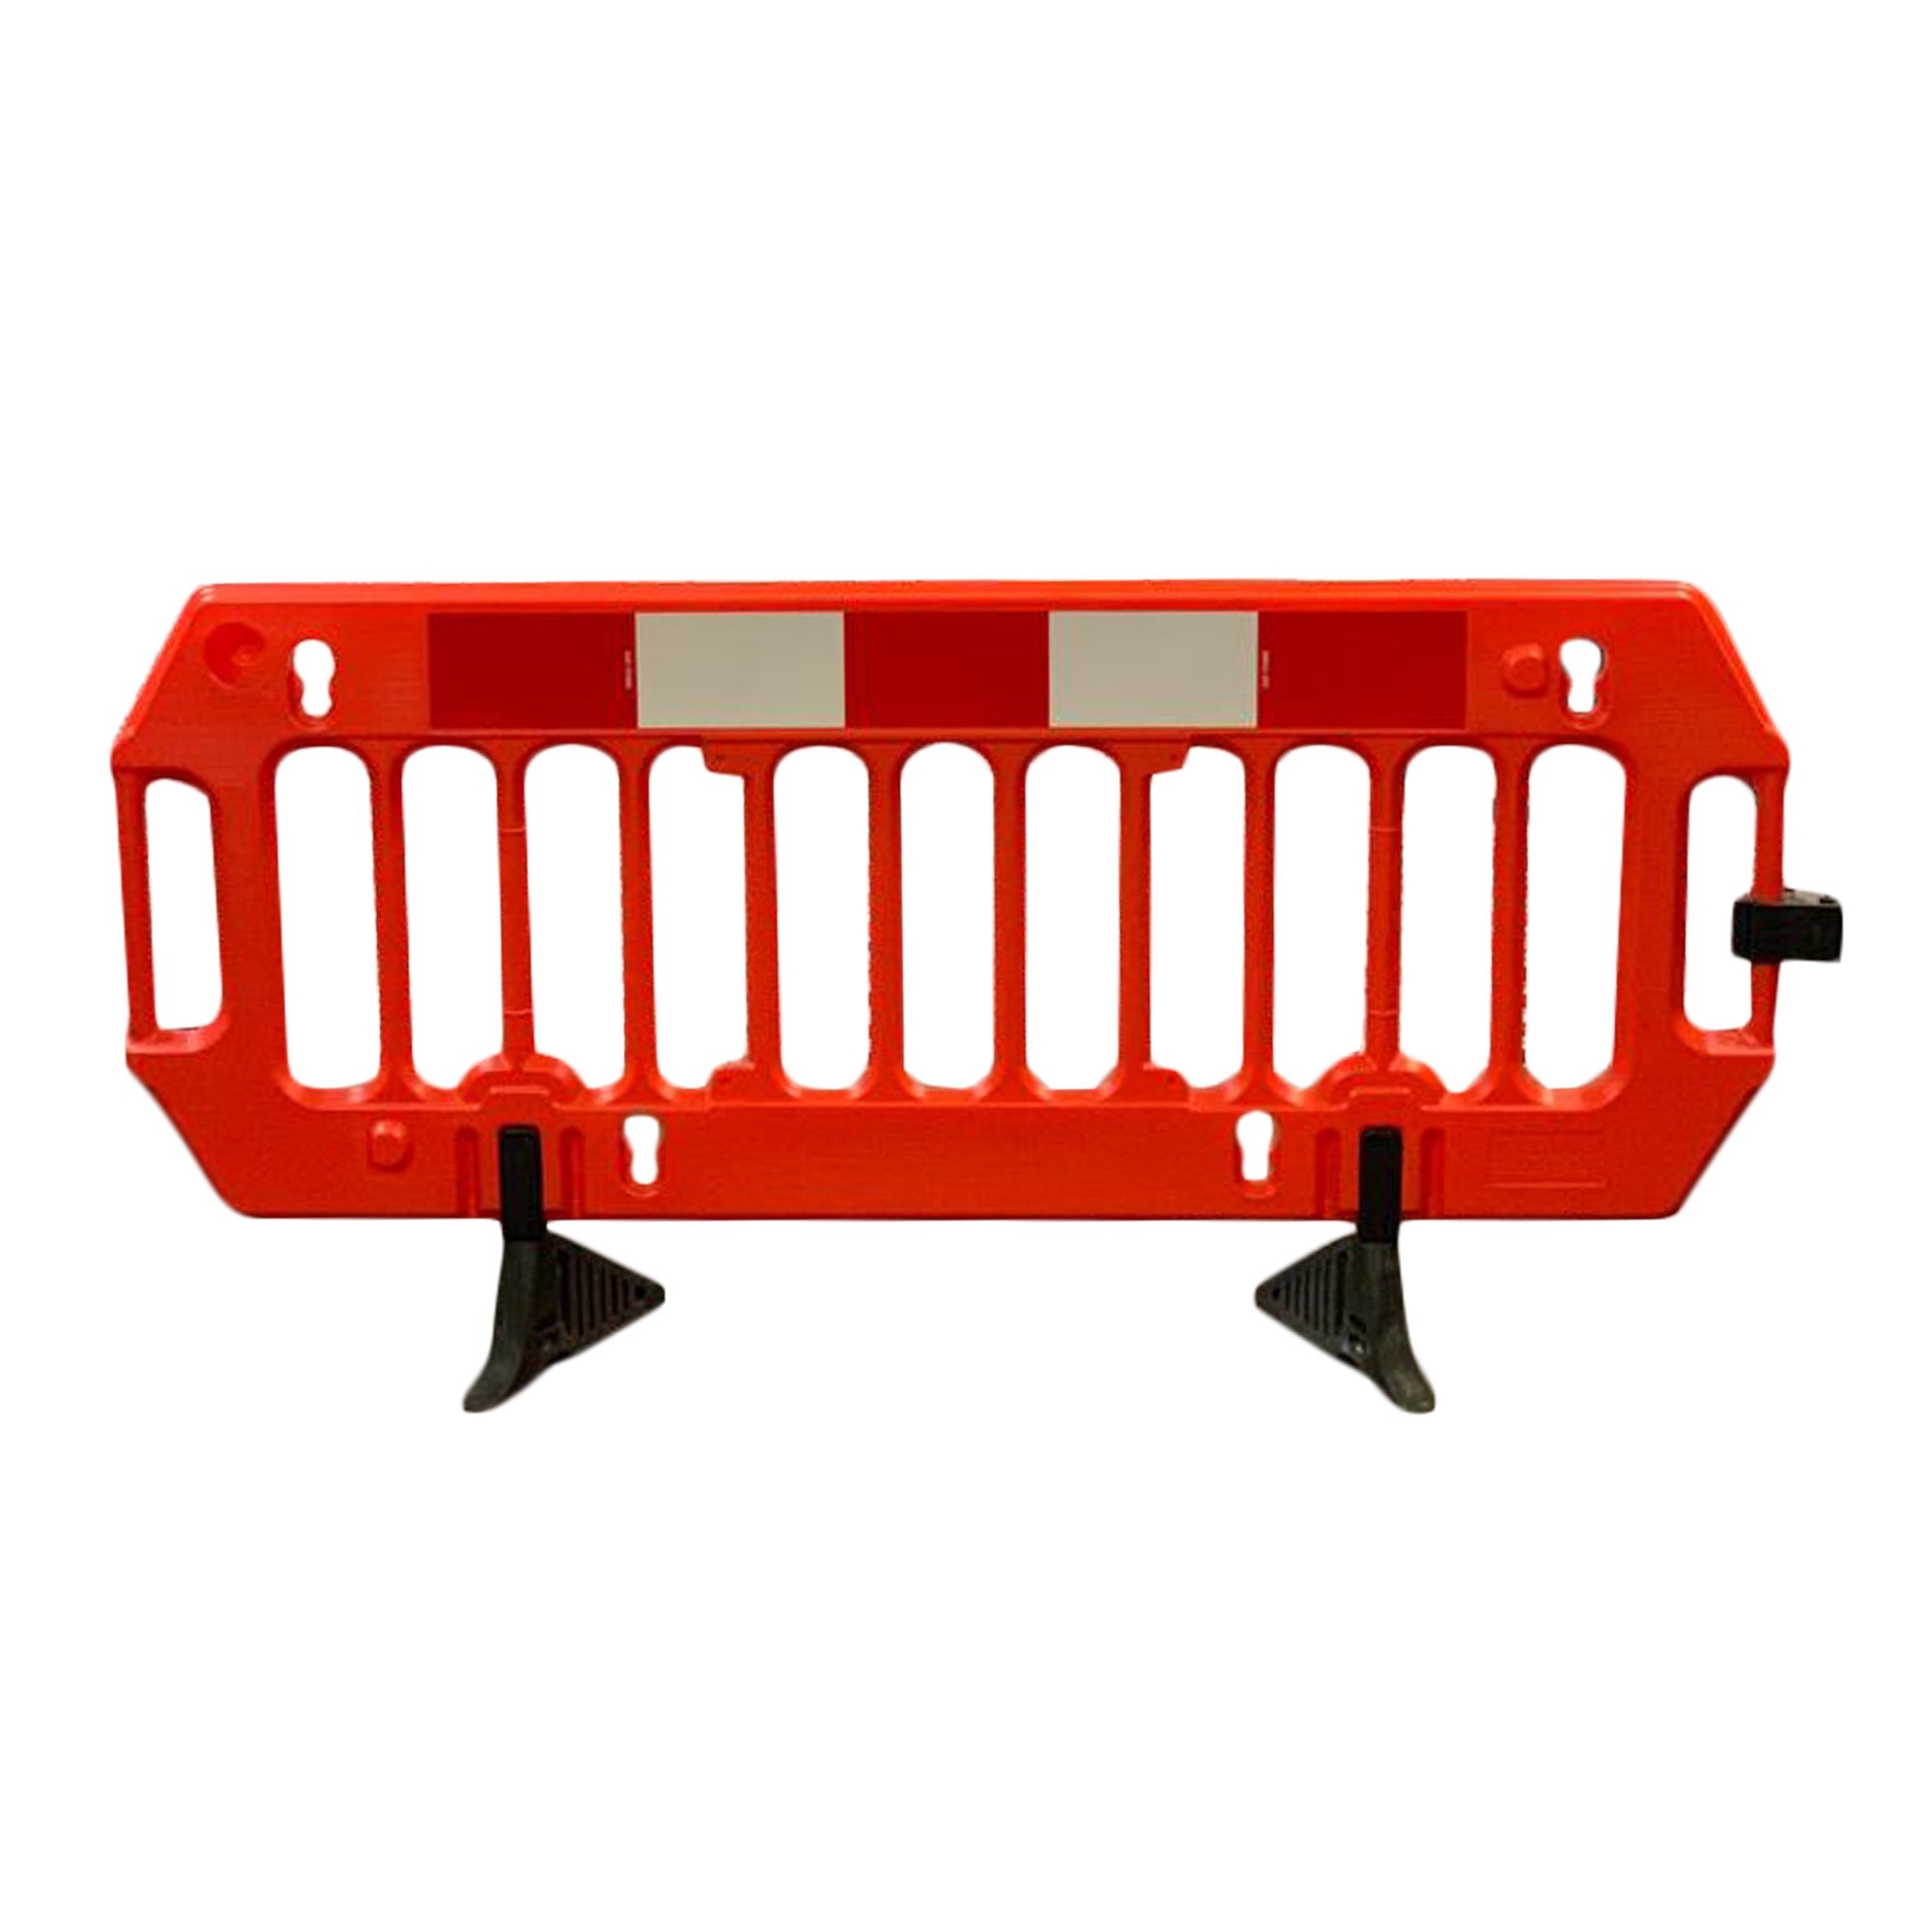 2M Tuff Barrier Anti Trip Red / White Colour Street Solutions UK